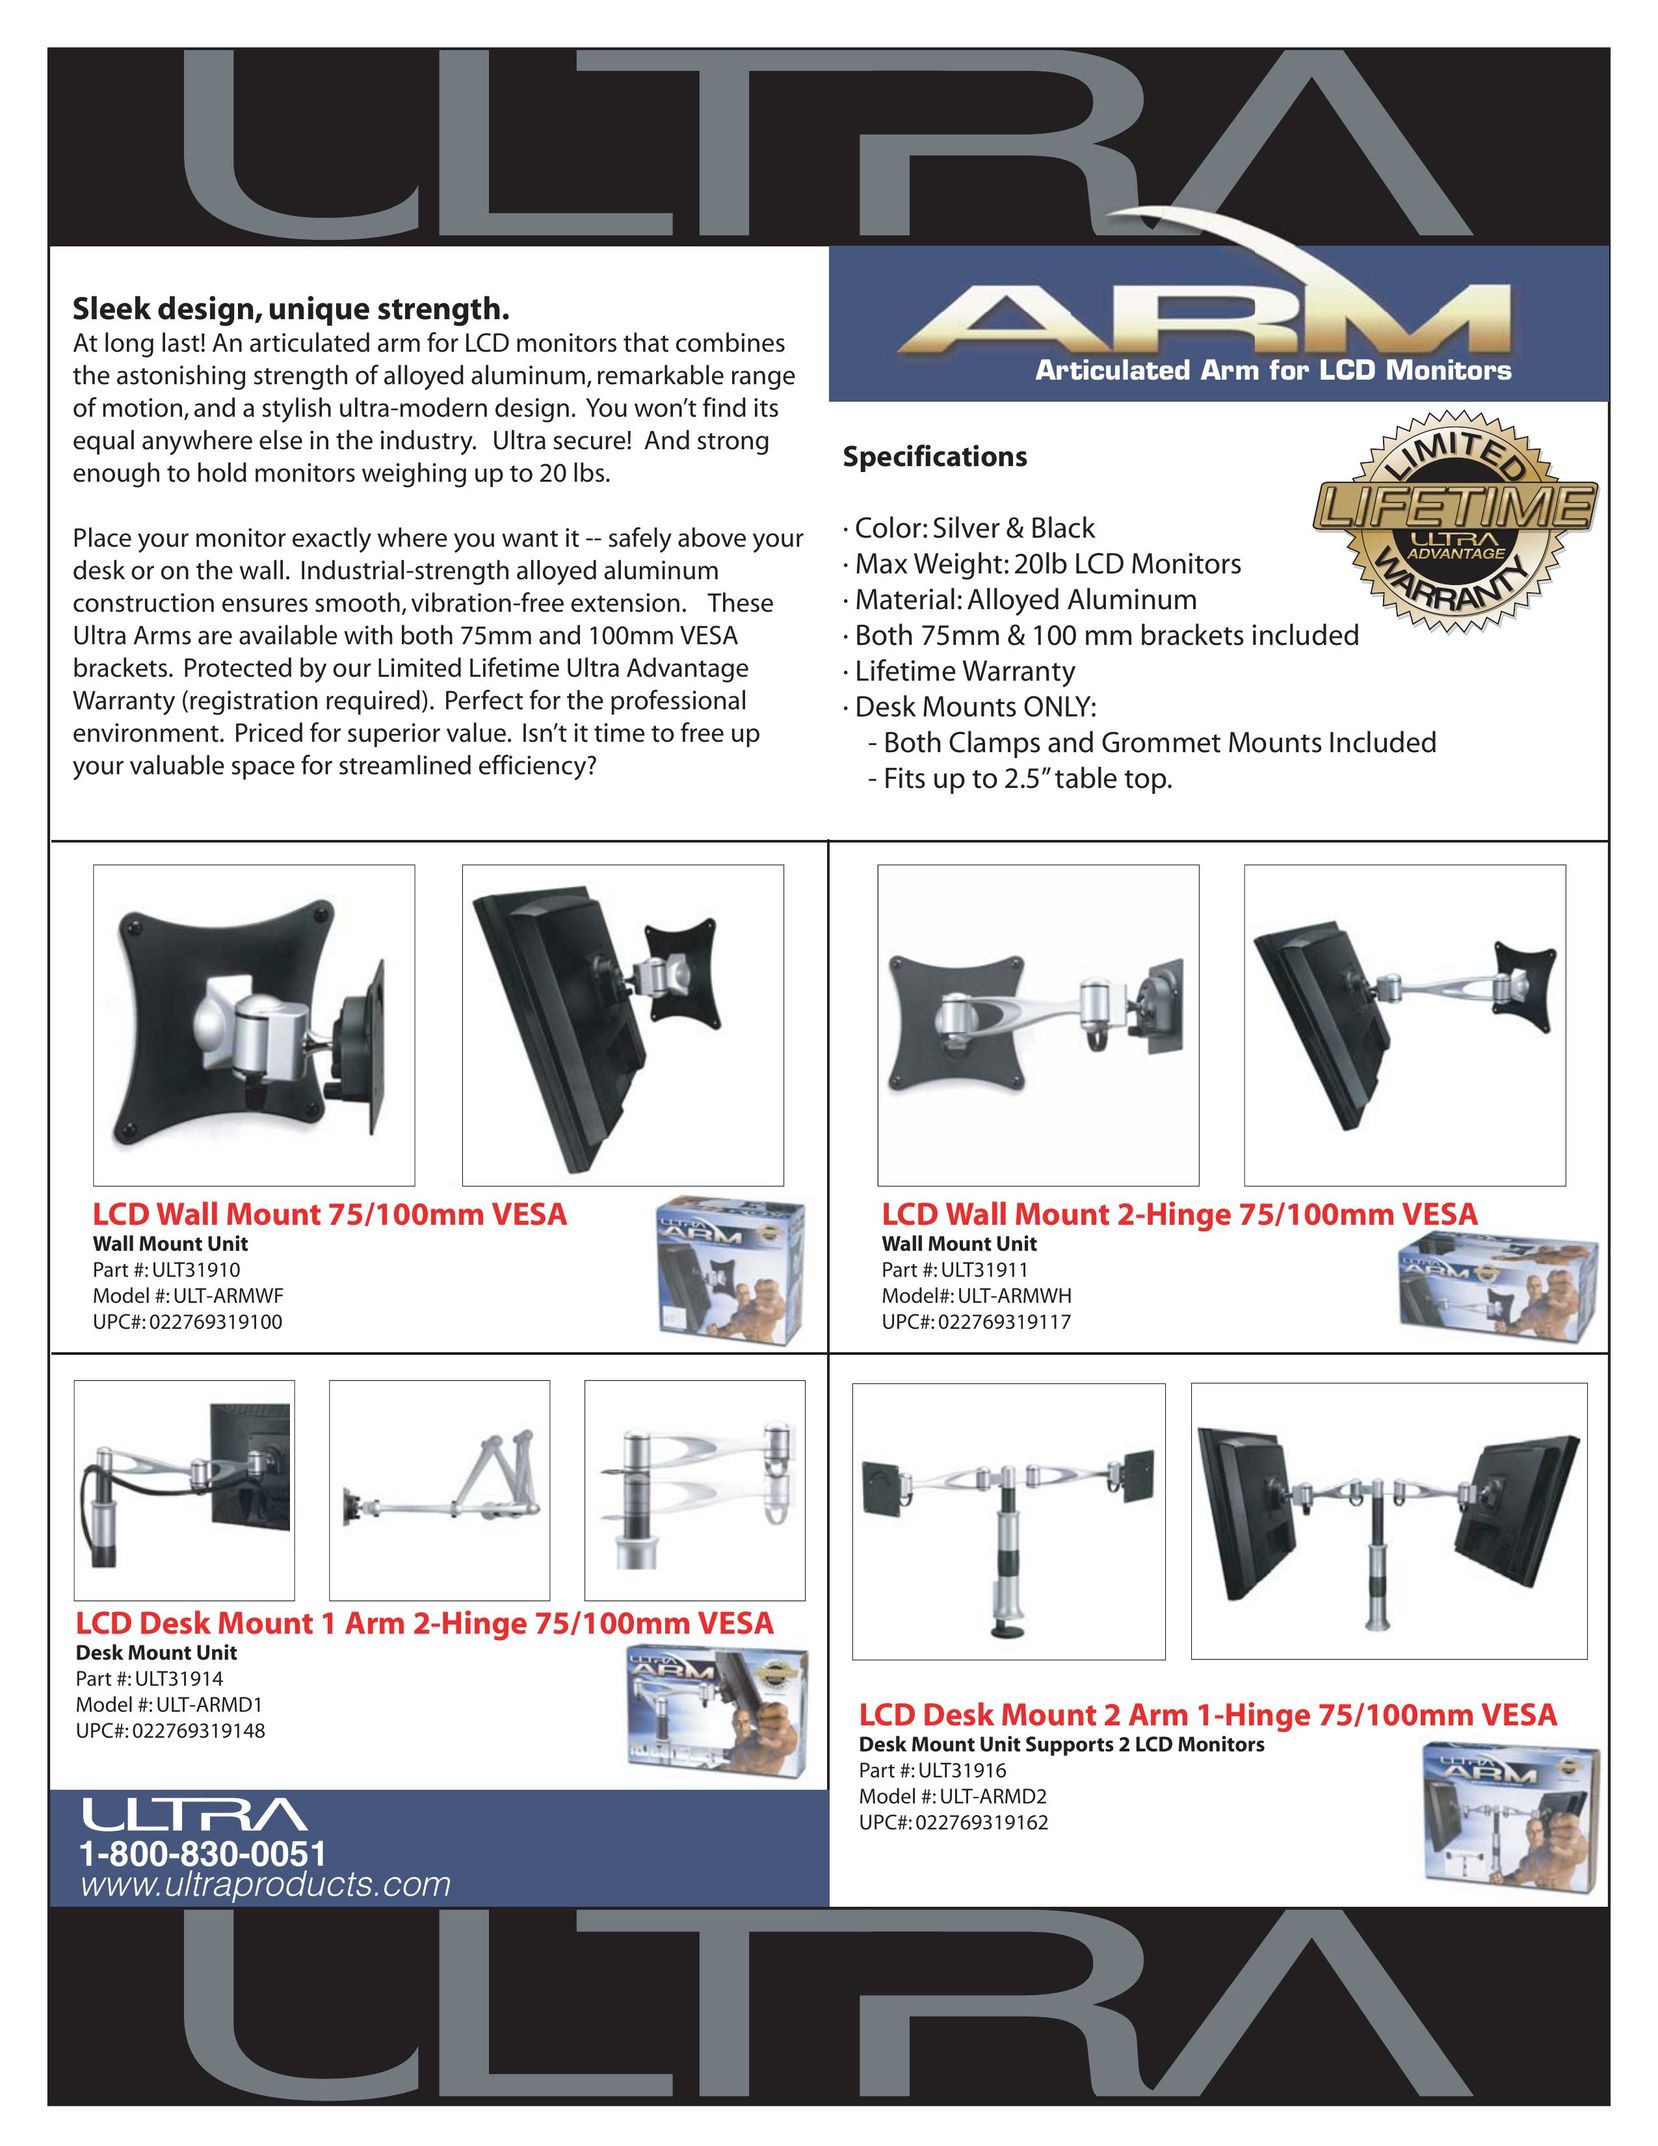 Ultra Products ULT-ARMD2 Indoor Furnishings User Manual